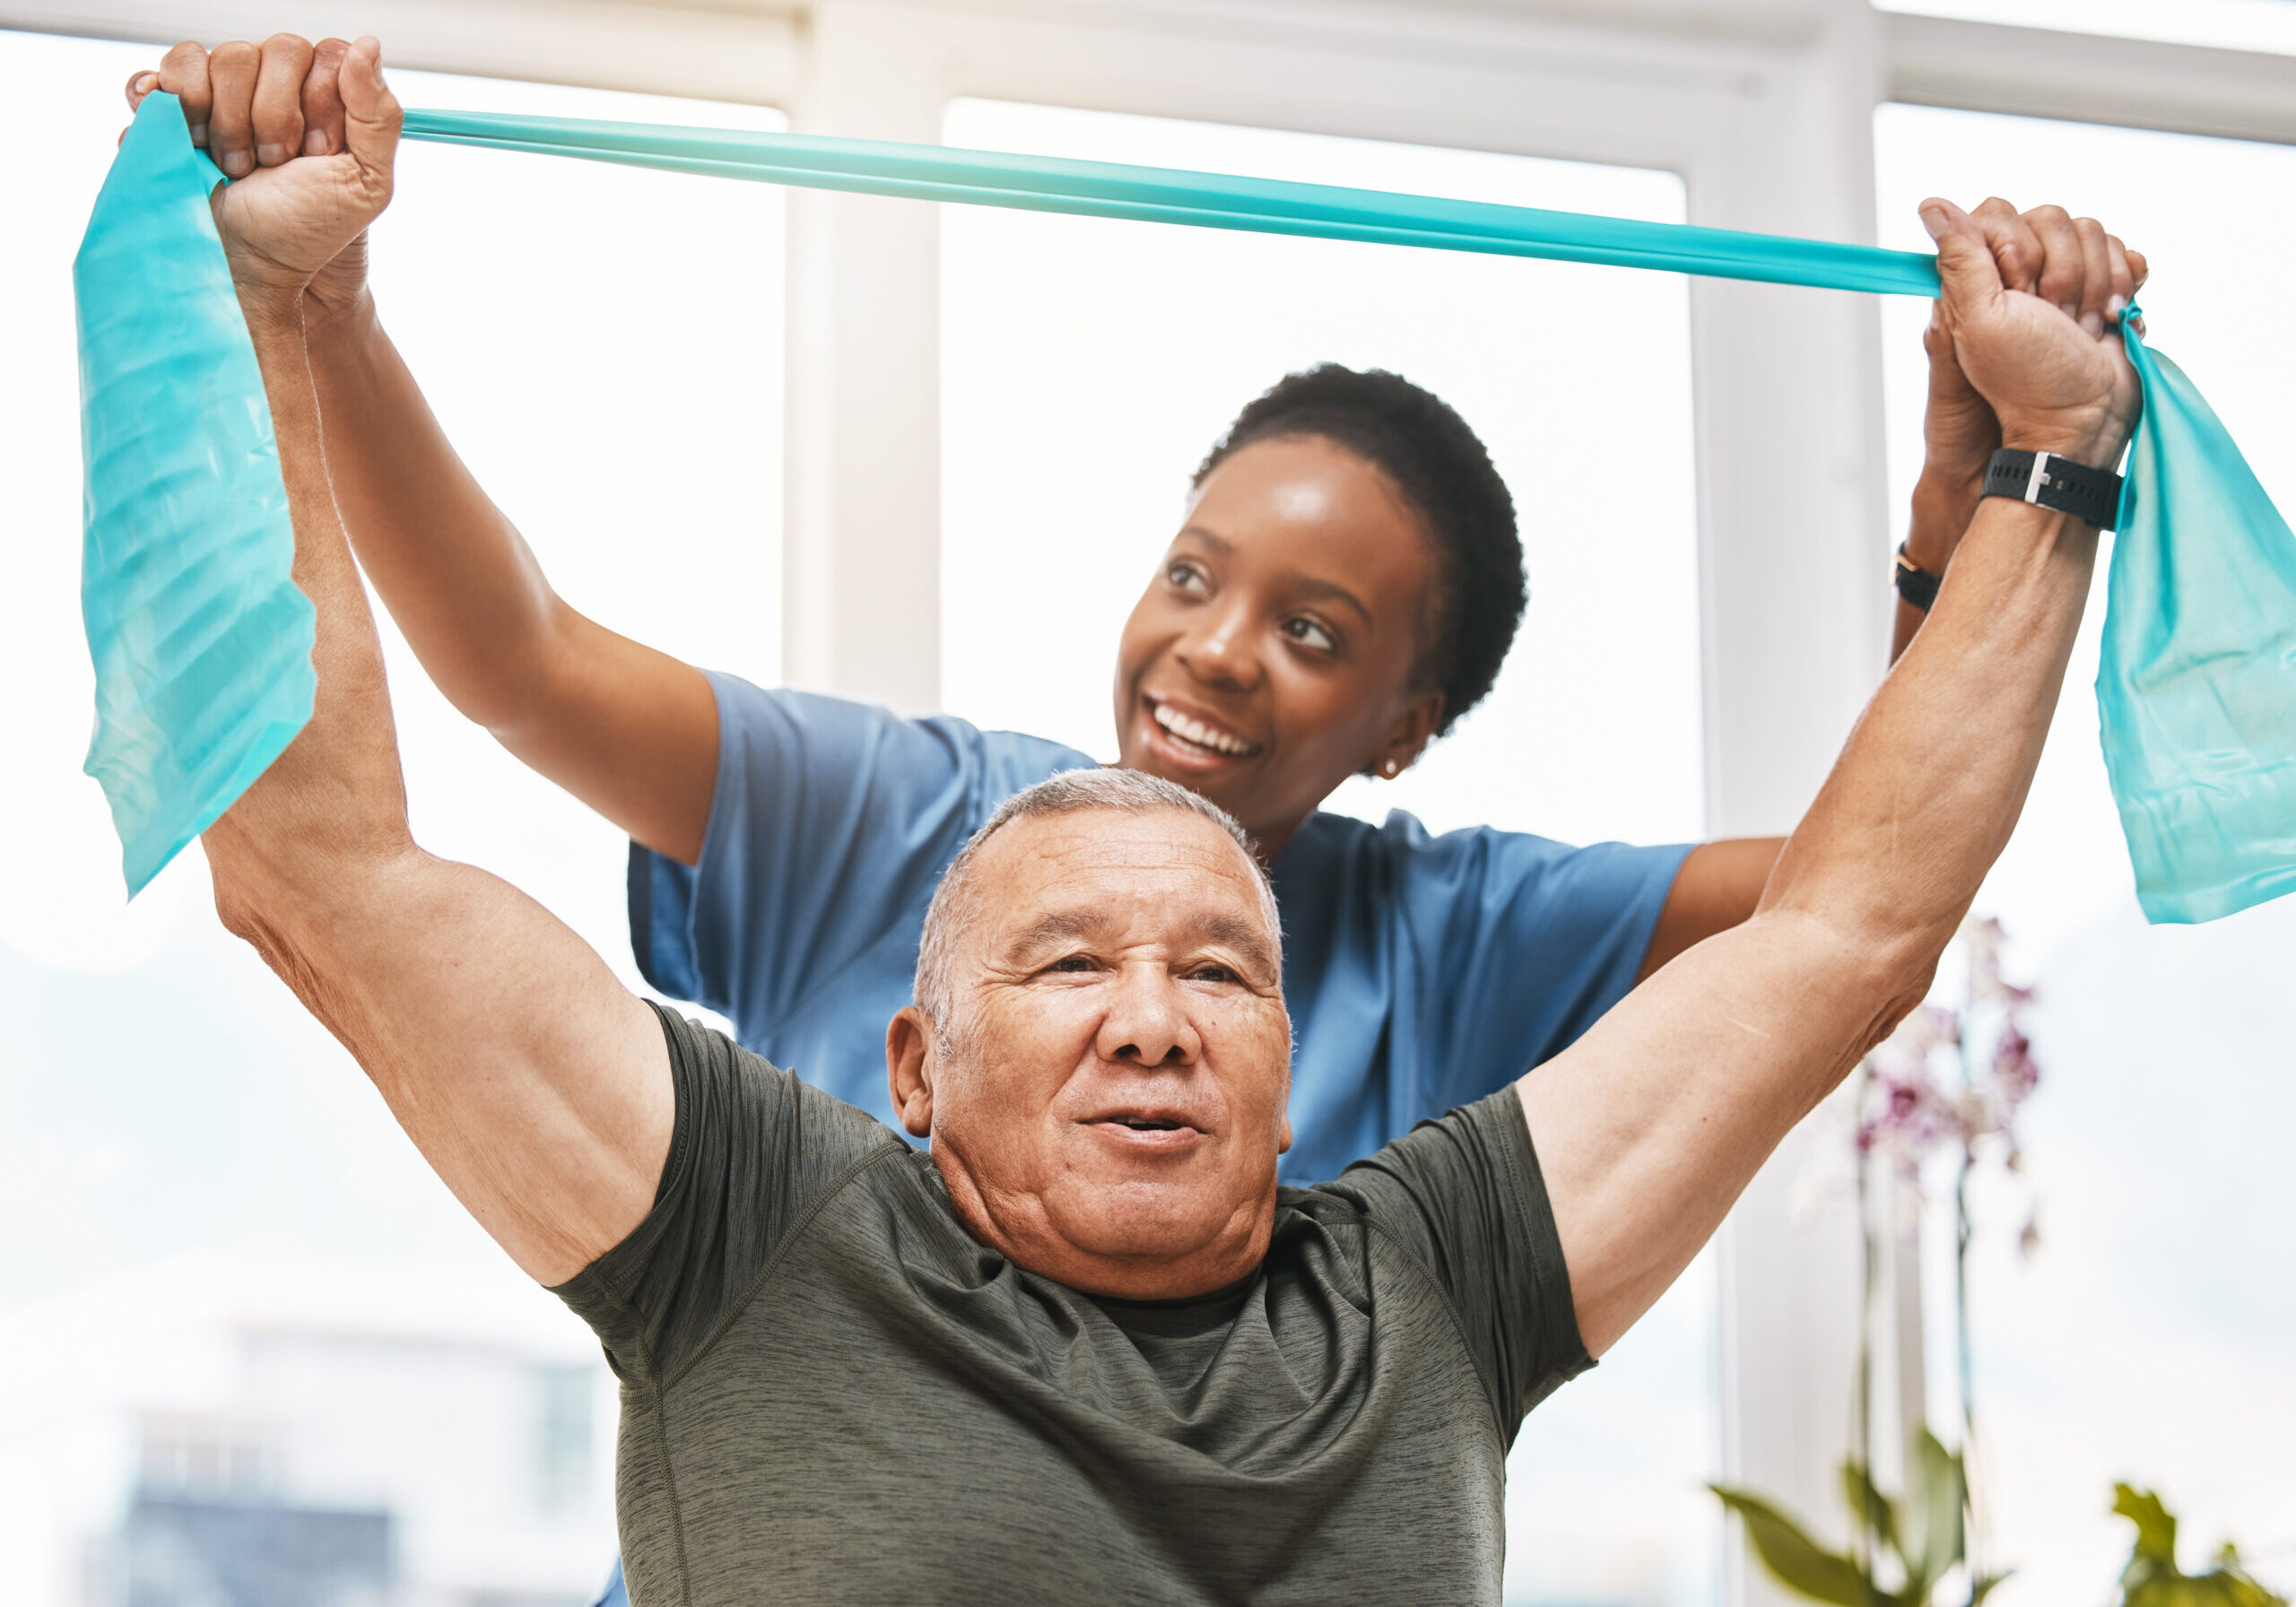 Physiotherapy help, stretching band and doctor with senior man for physical therapy, rehabilitation and healthcare support. Black woman chiropractor or physiotherapy doctor consulting elderly patient